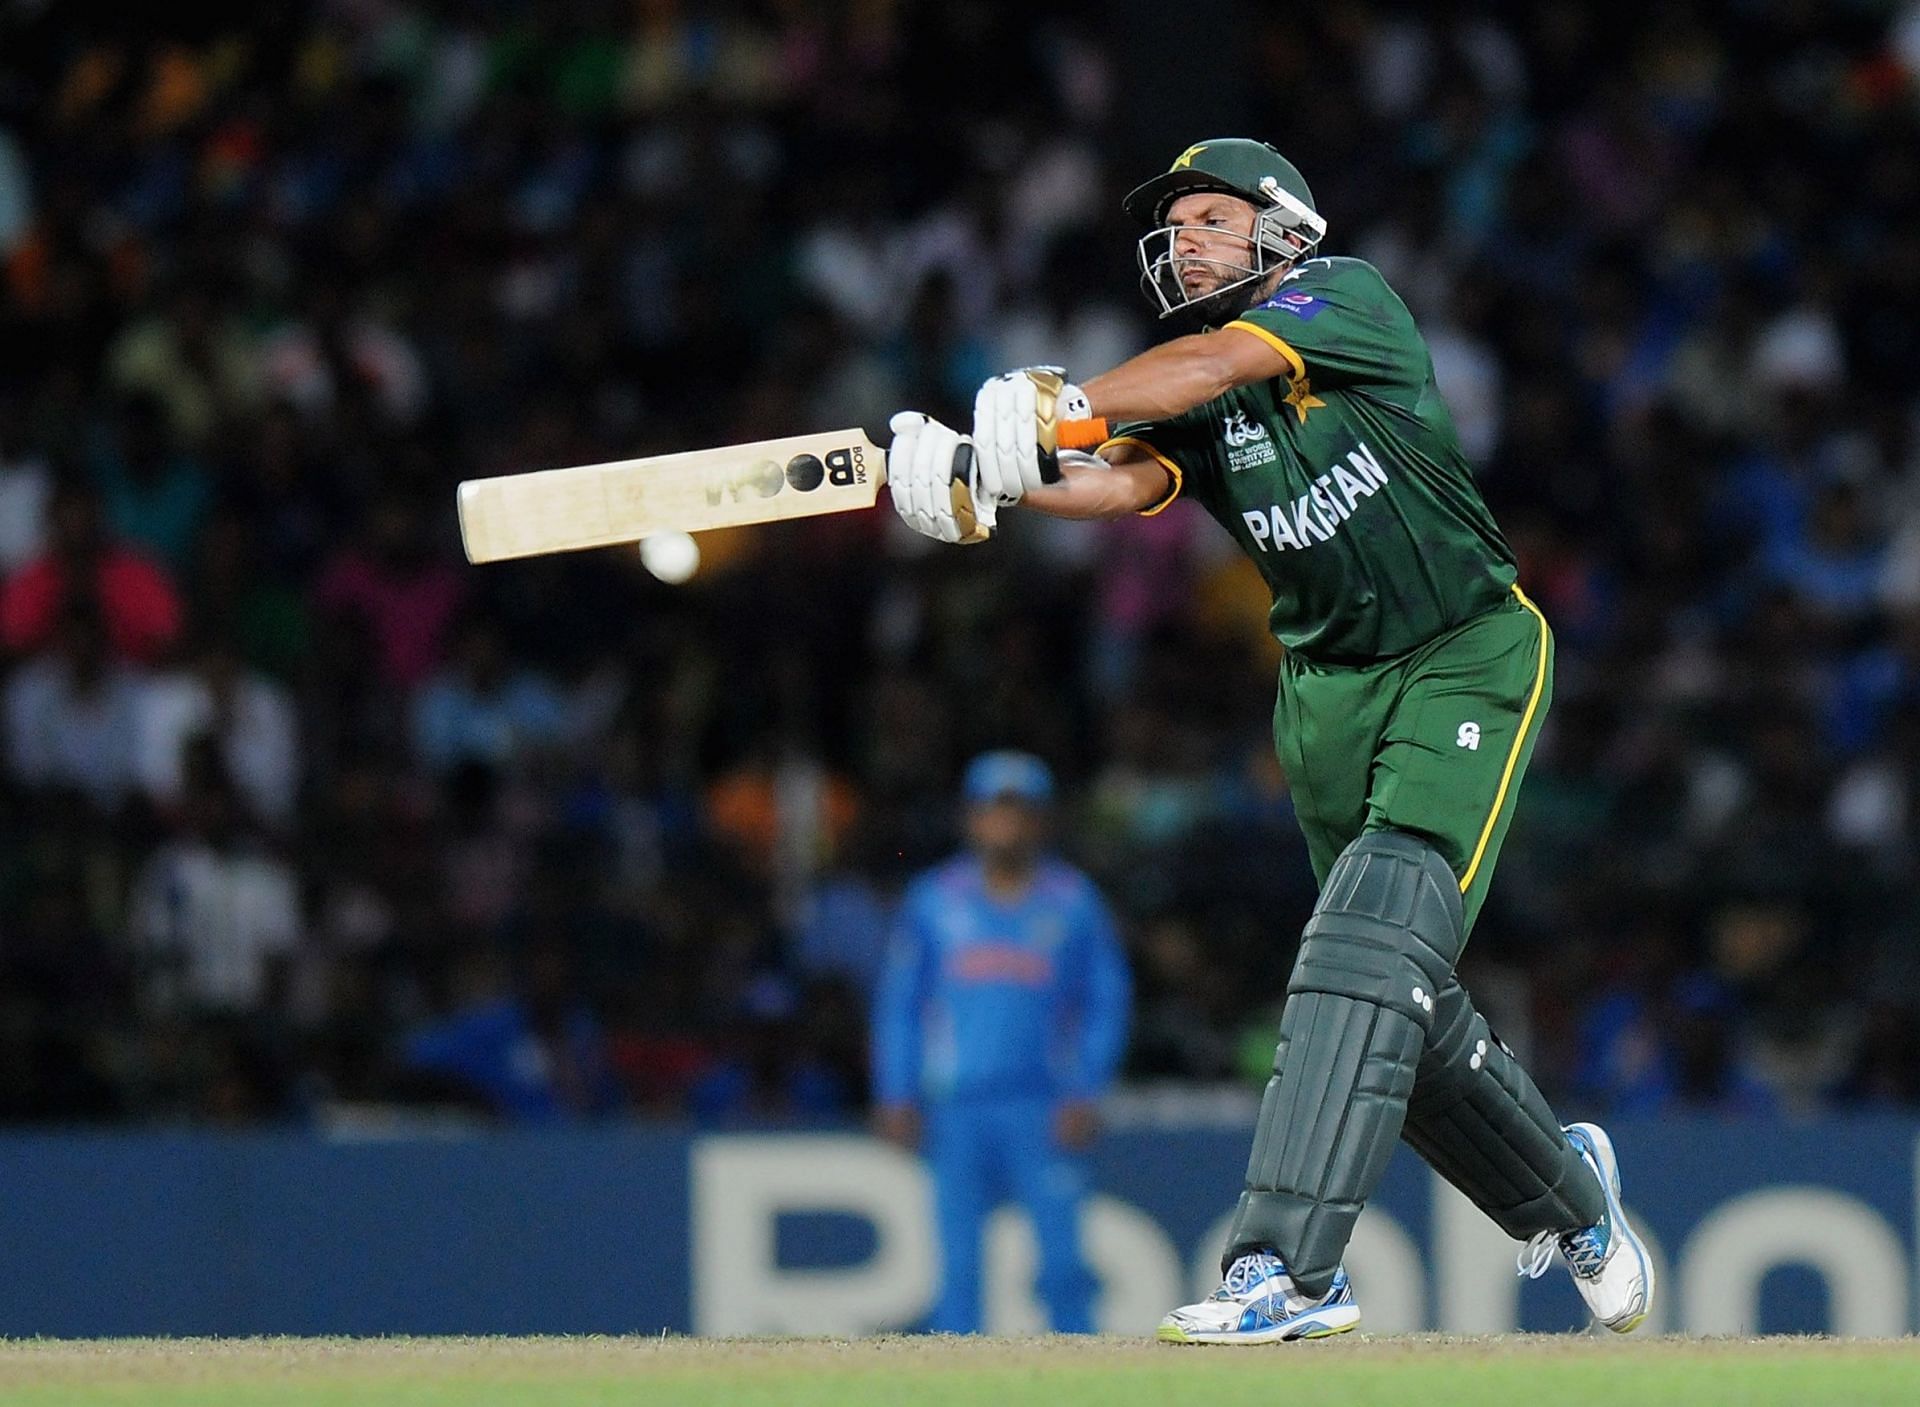 Shahid Afridi bats during the 2012 T20 World Cup match against India. Pic: Getty Images